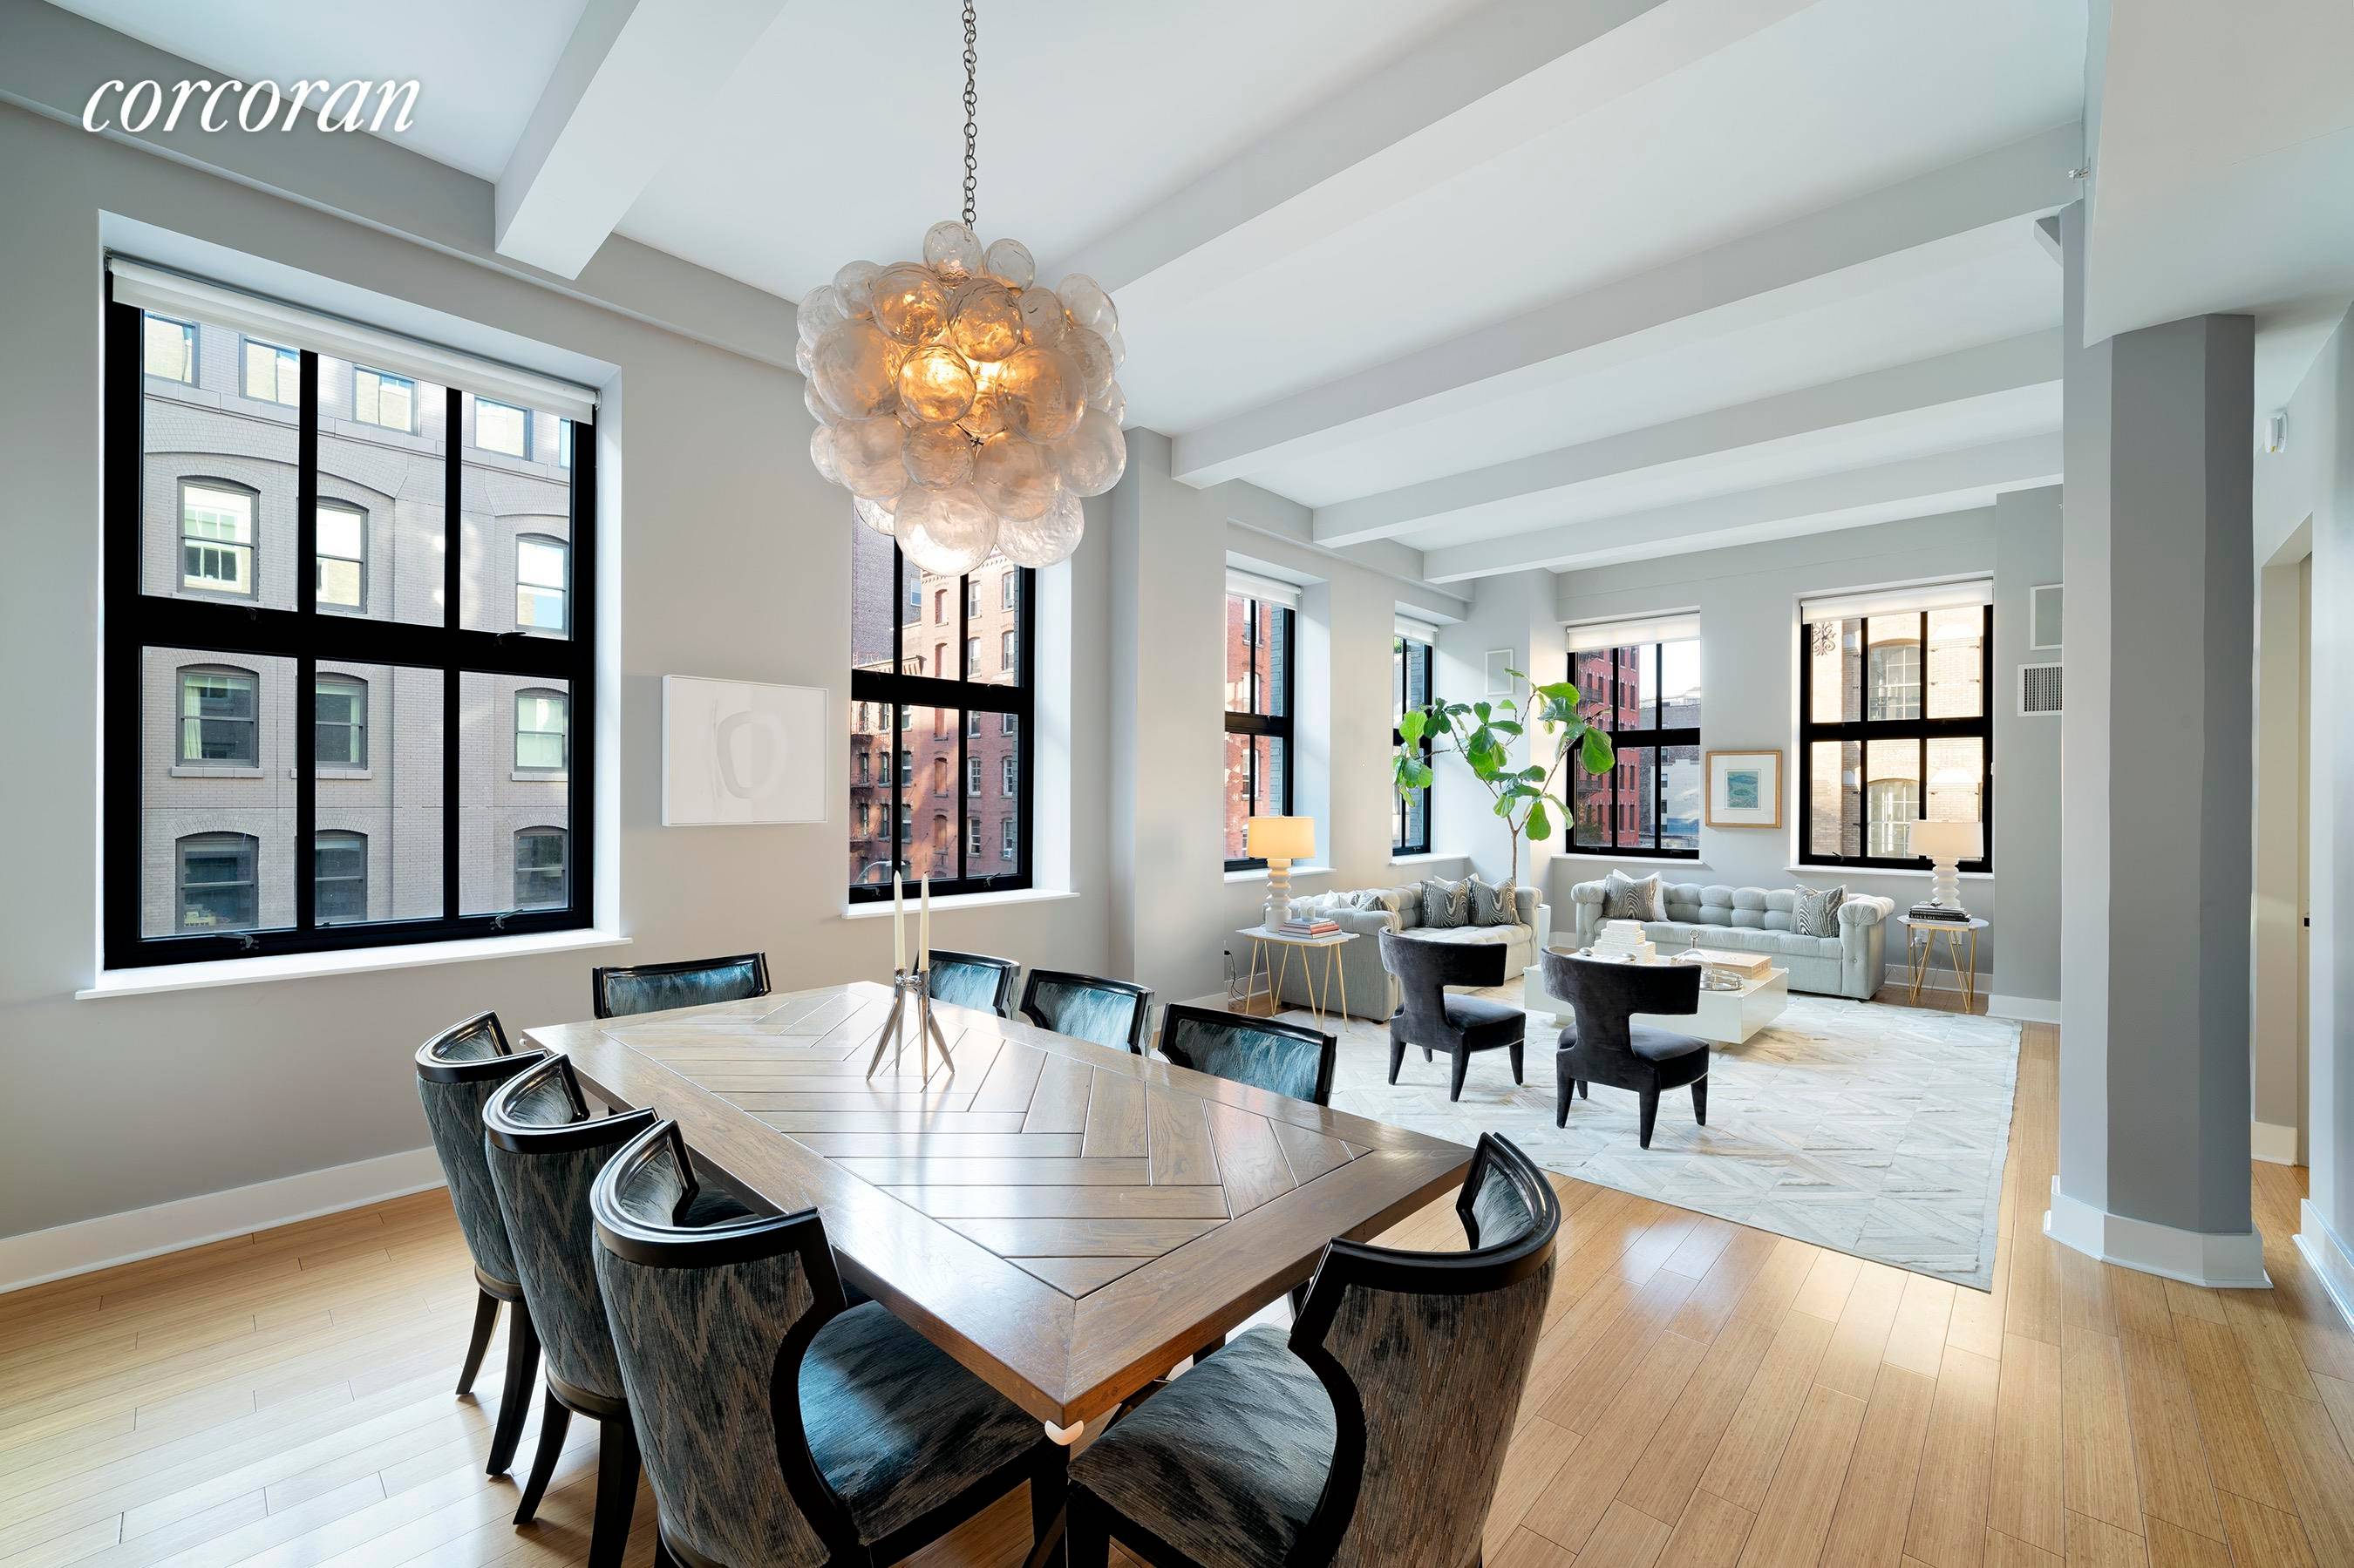 Exquisite luxury and dramatic proportions await in this premier three bedroom, three and a half bathroom loft in one of Tribeca's best full service condominiums.